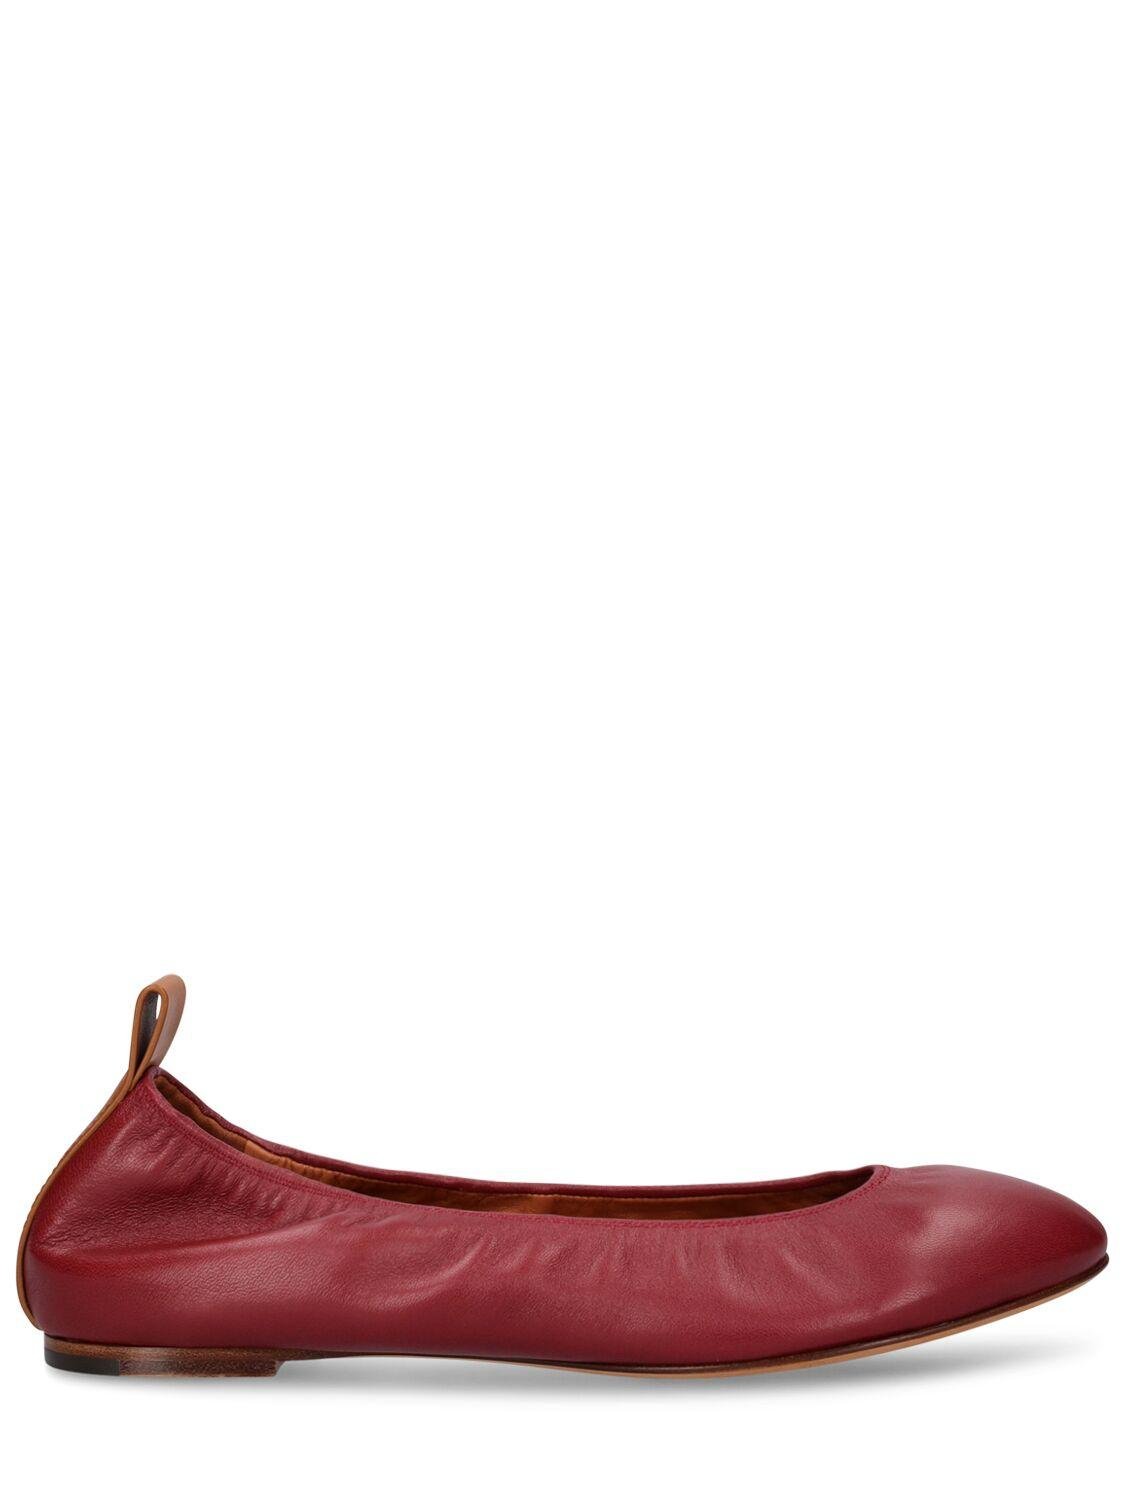 5mm Leather Ballerina Flats by LANVIN